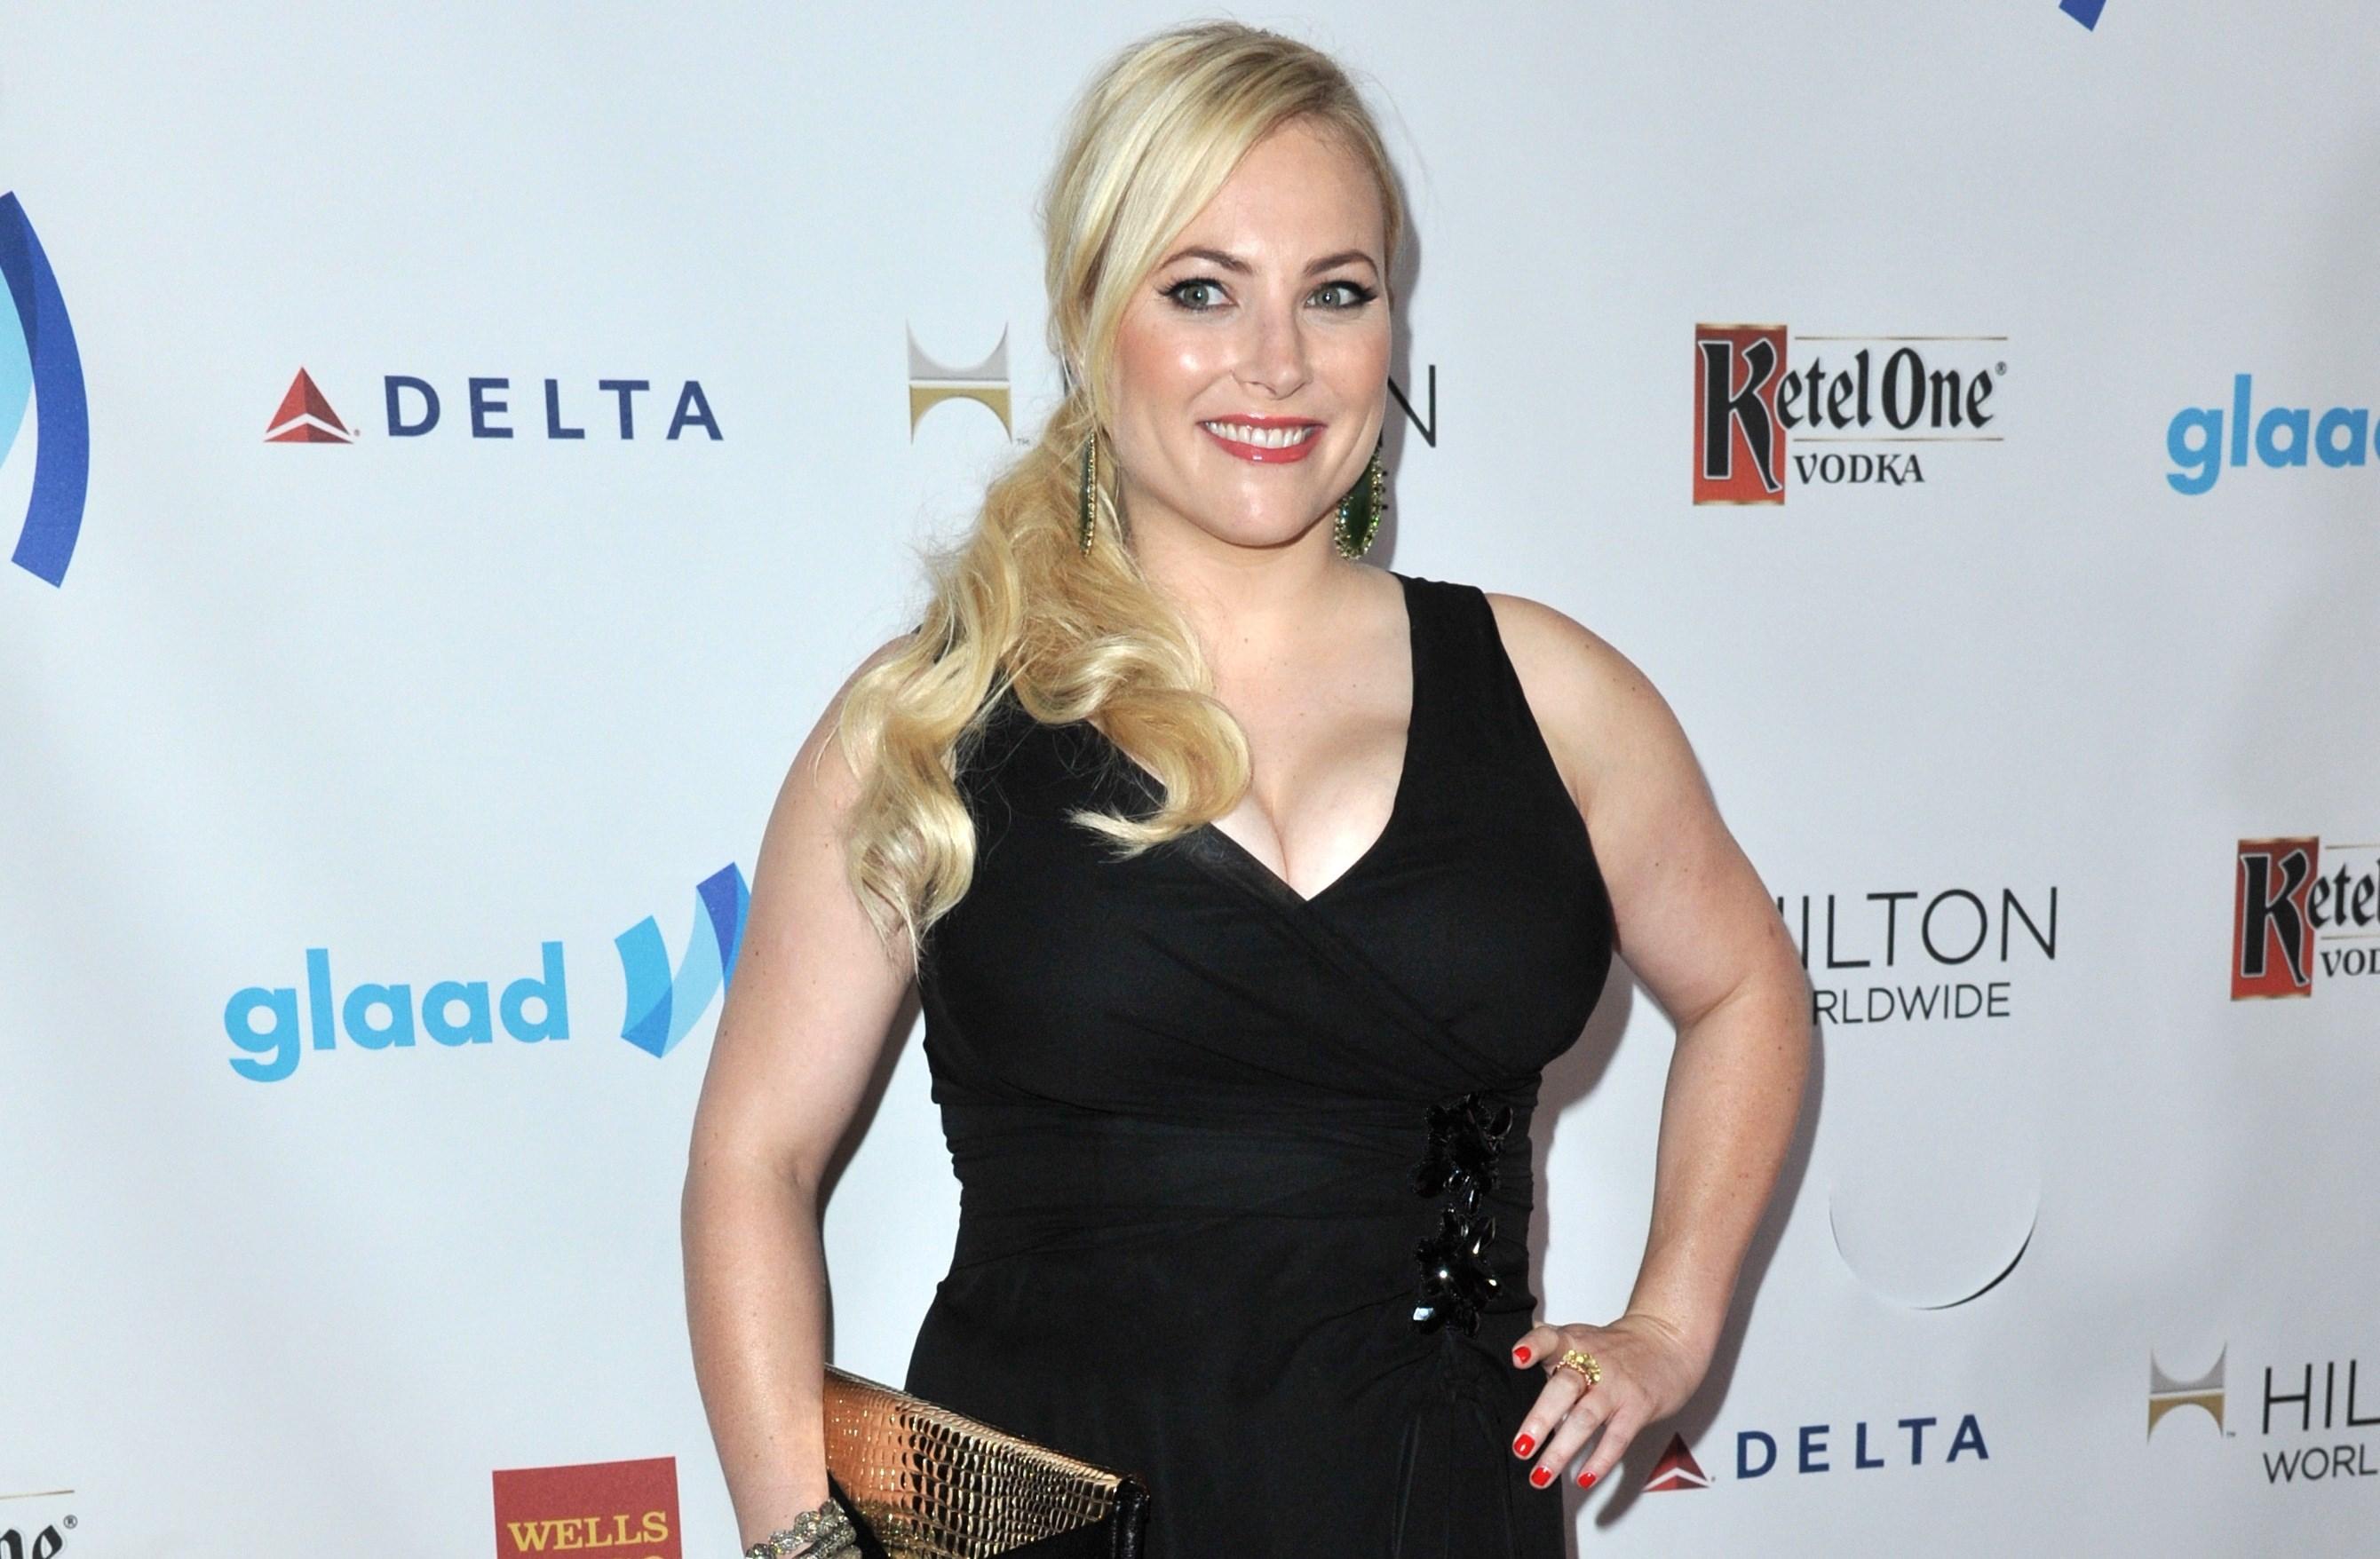 Meghan Mccain. Known people people news and biographies